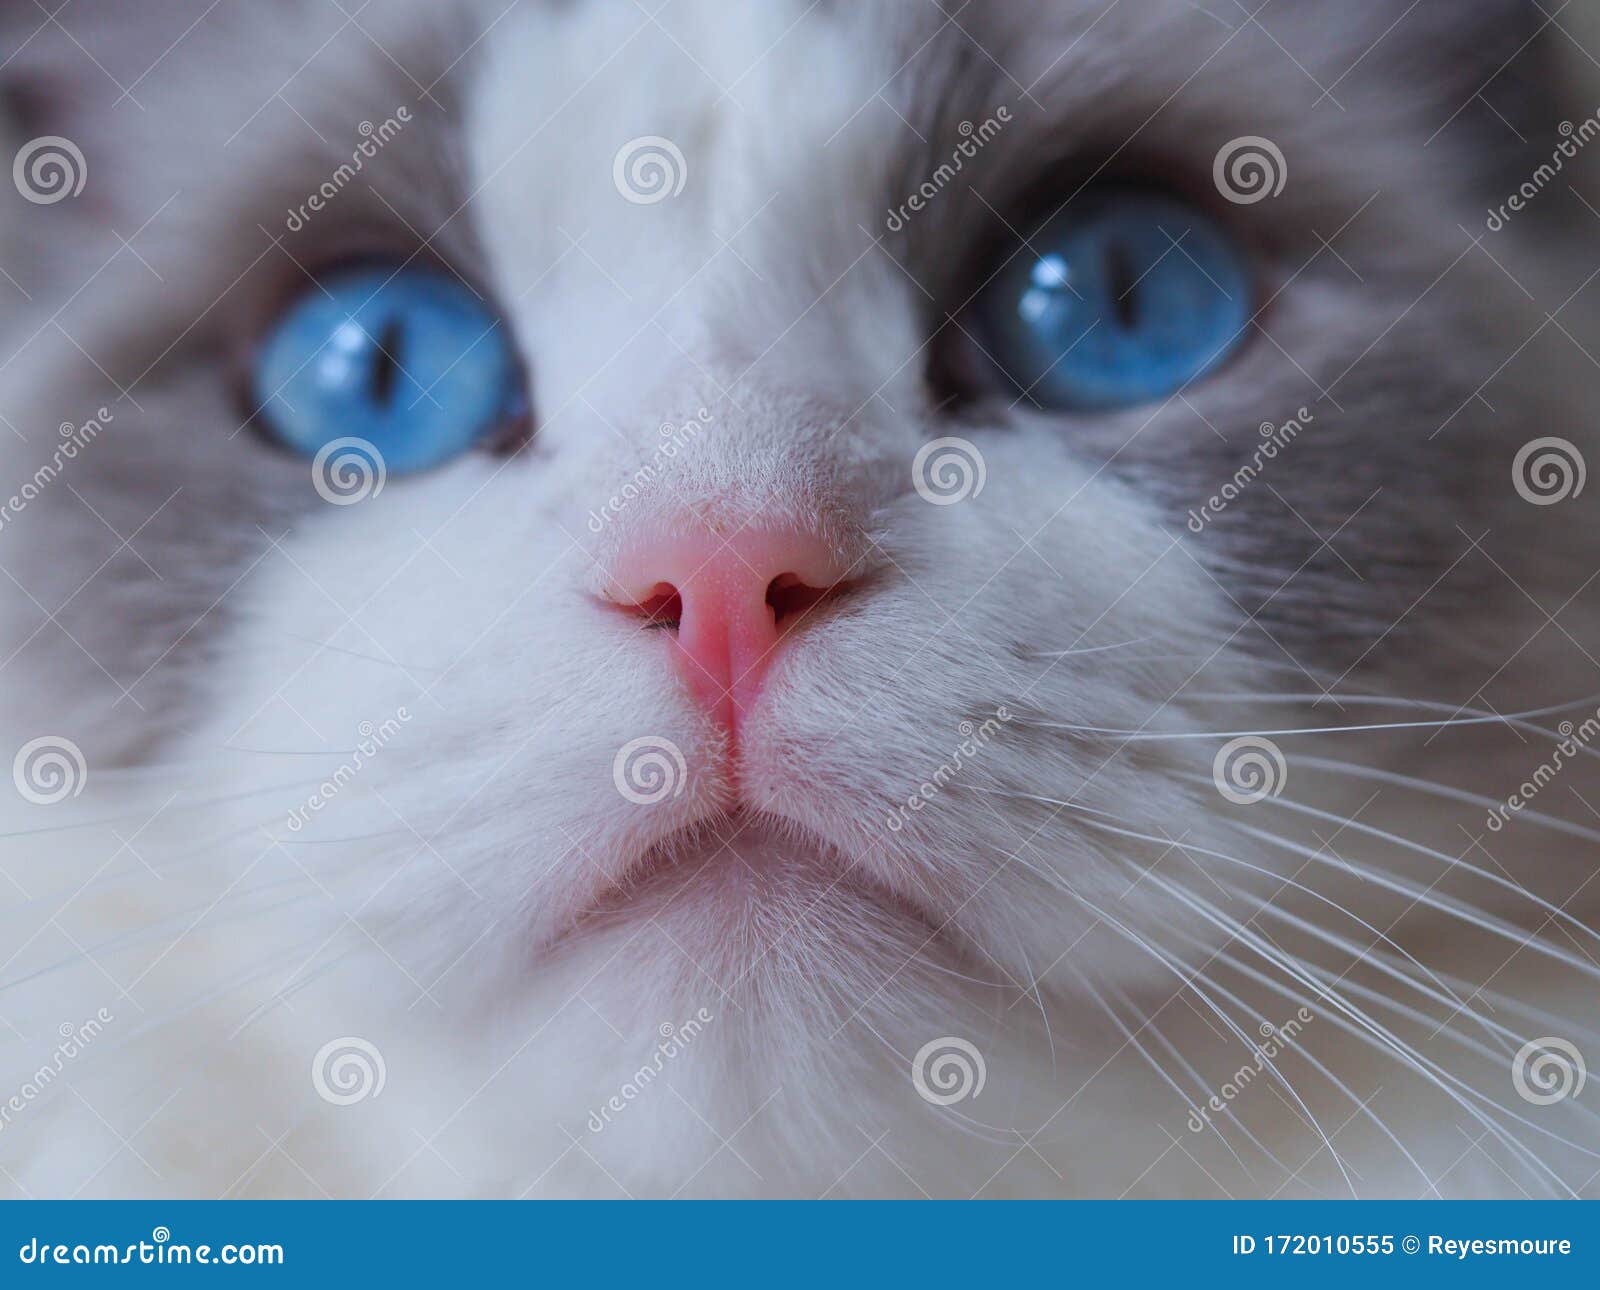 awesome cat with blue eyes close up.